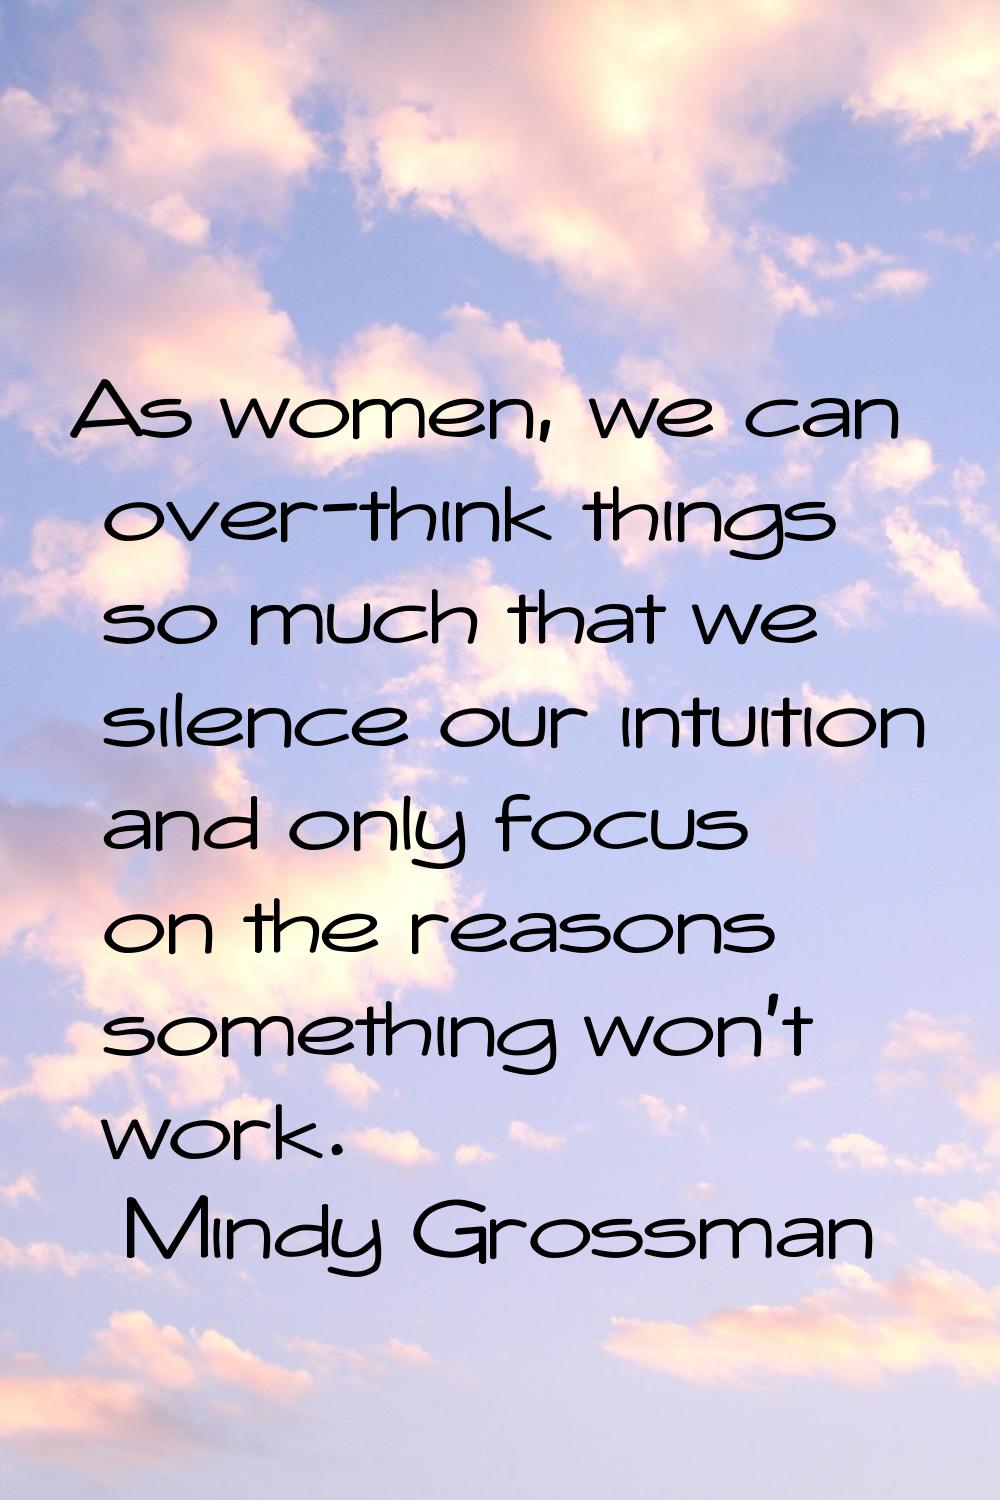 As women, we can over-think things so much that we silence our intuition and only focus on the reas